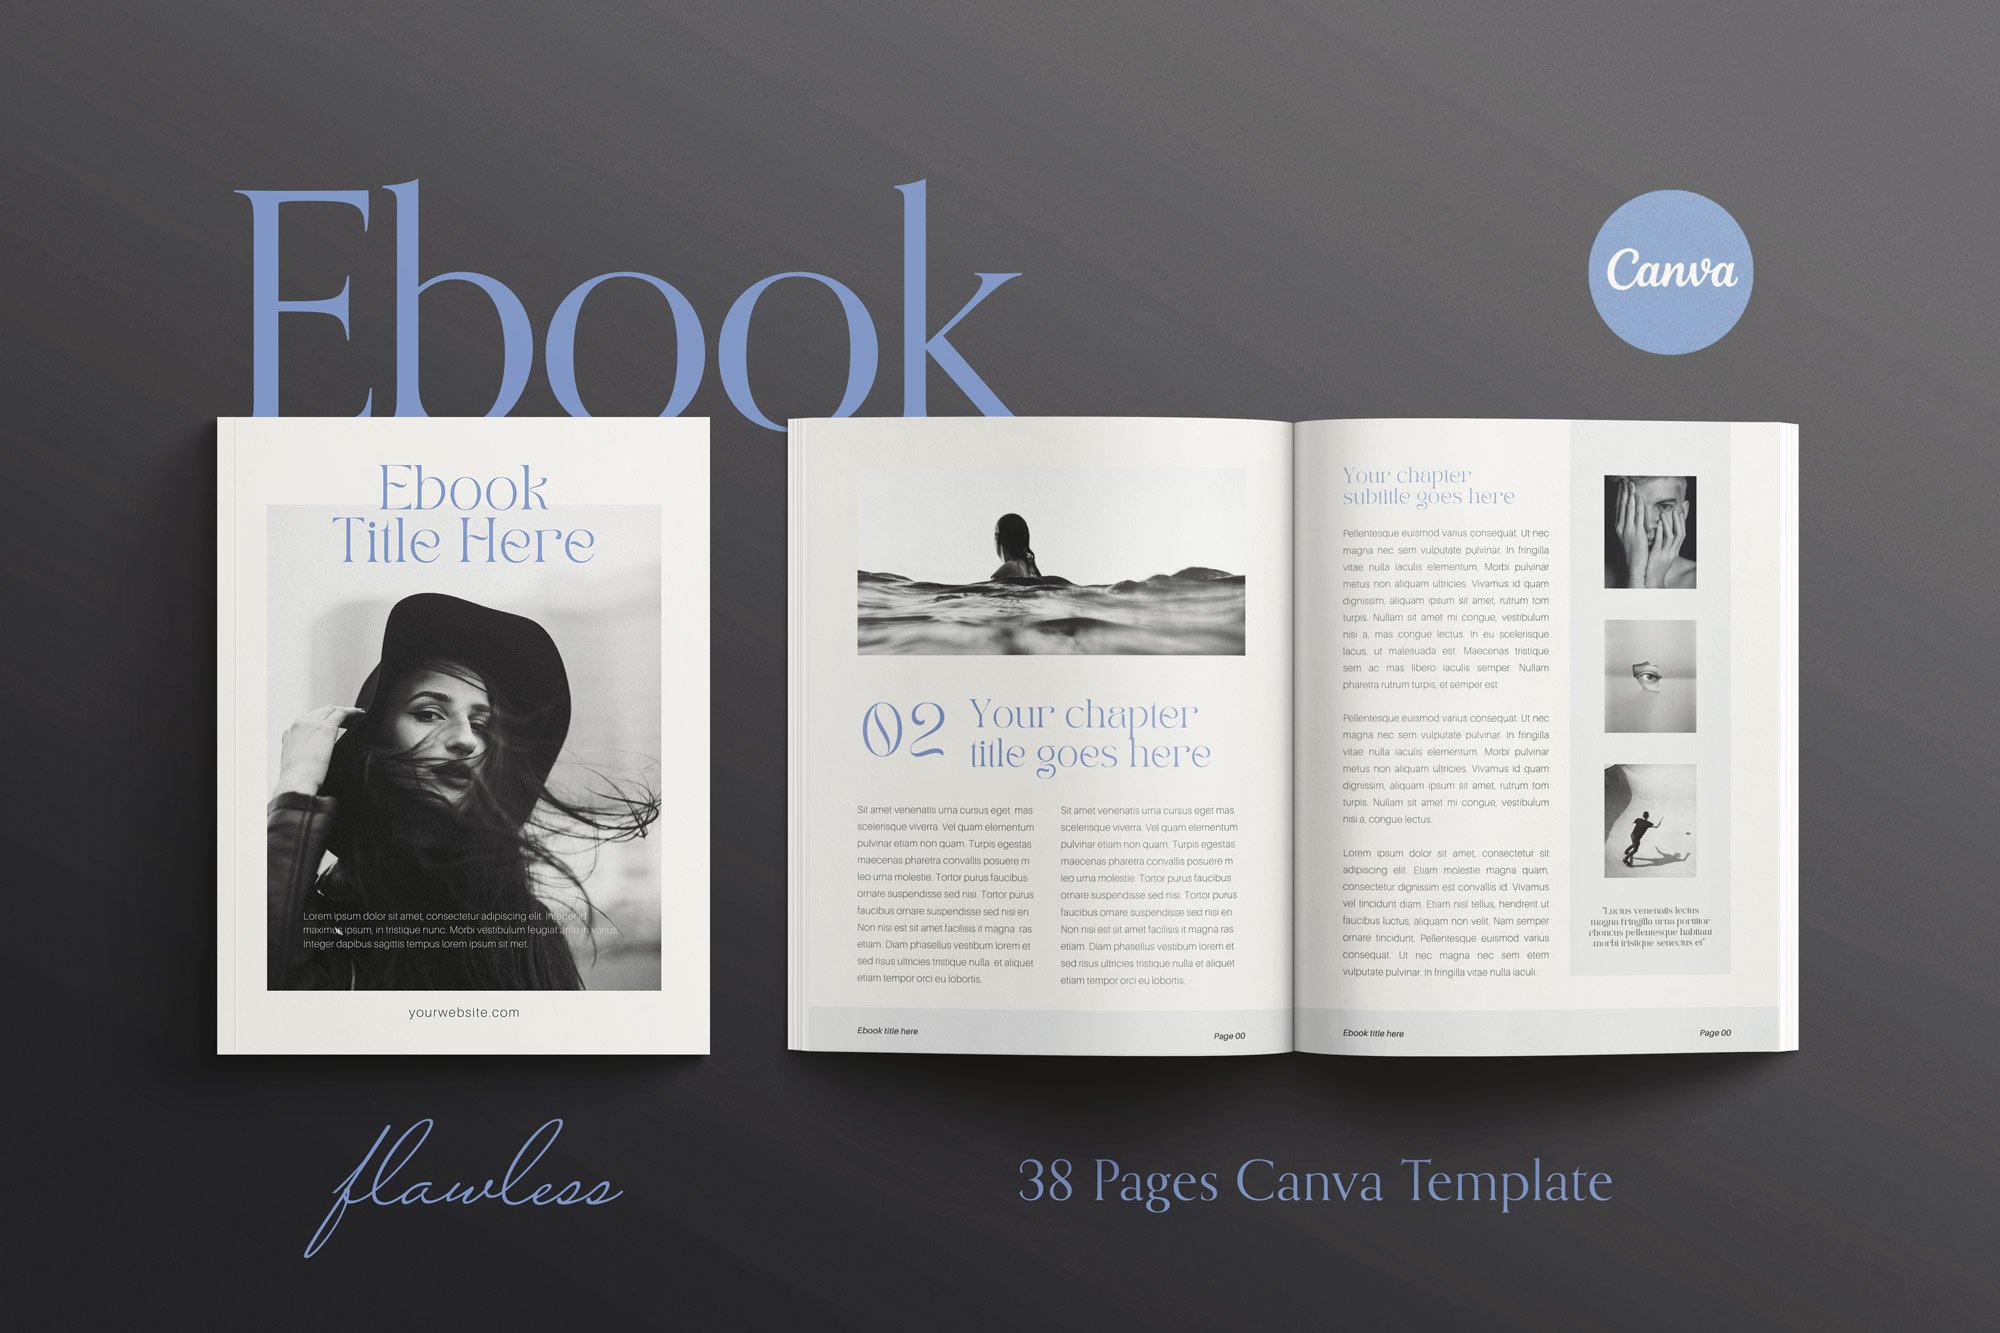 FLAWLESS | Ebook Canva Template cover image.